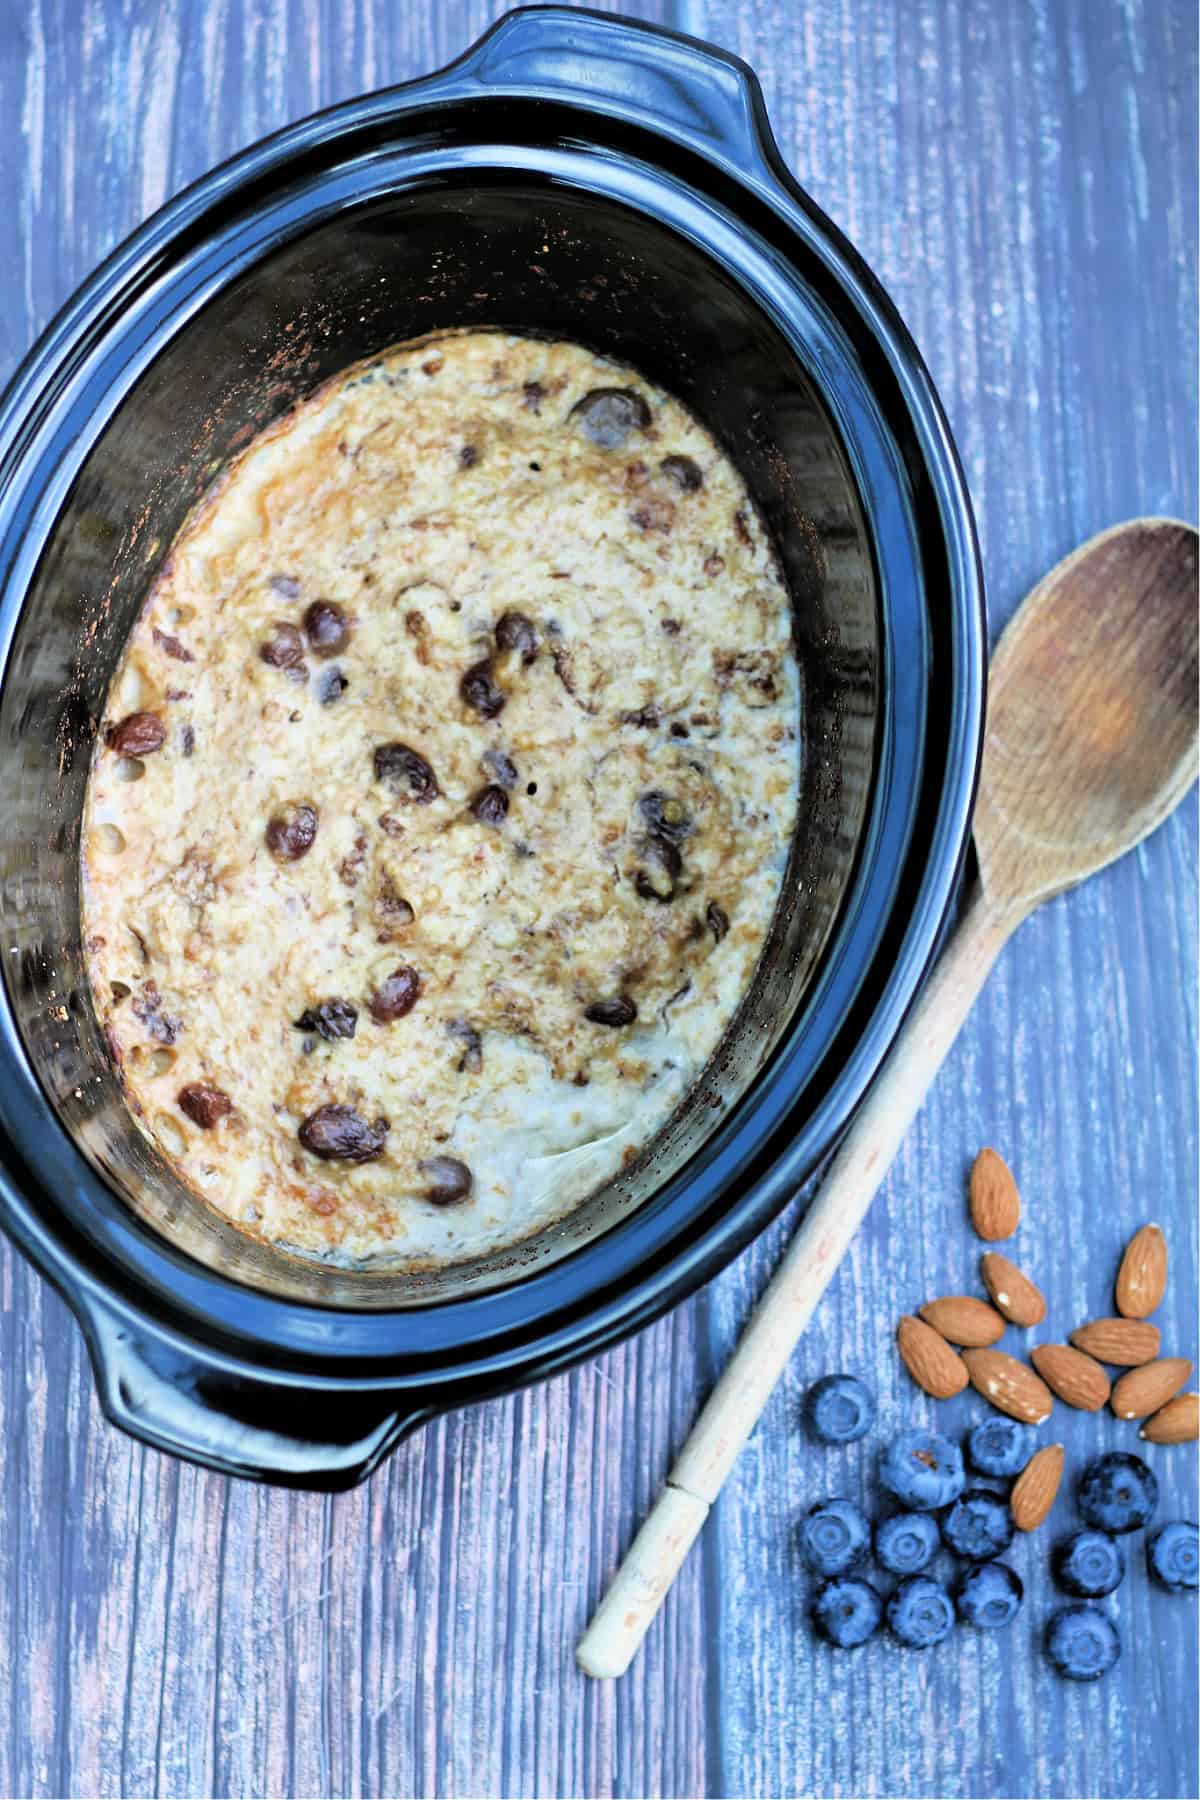 Slow cooker pot with oatmeal on a wooden background with a wooden spoon to the side.